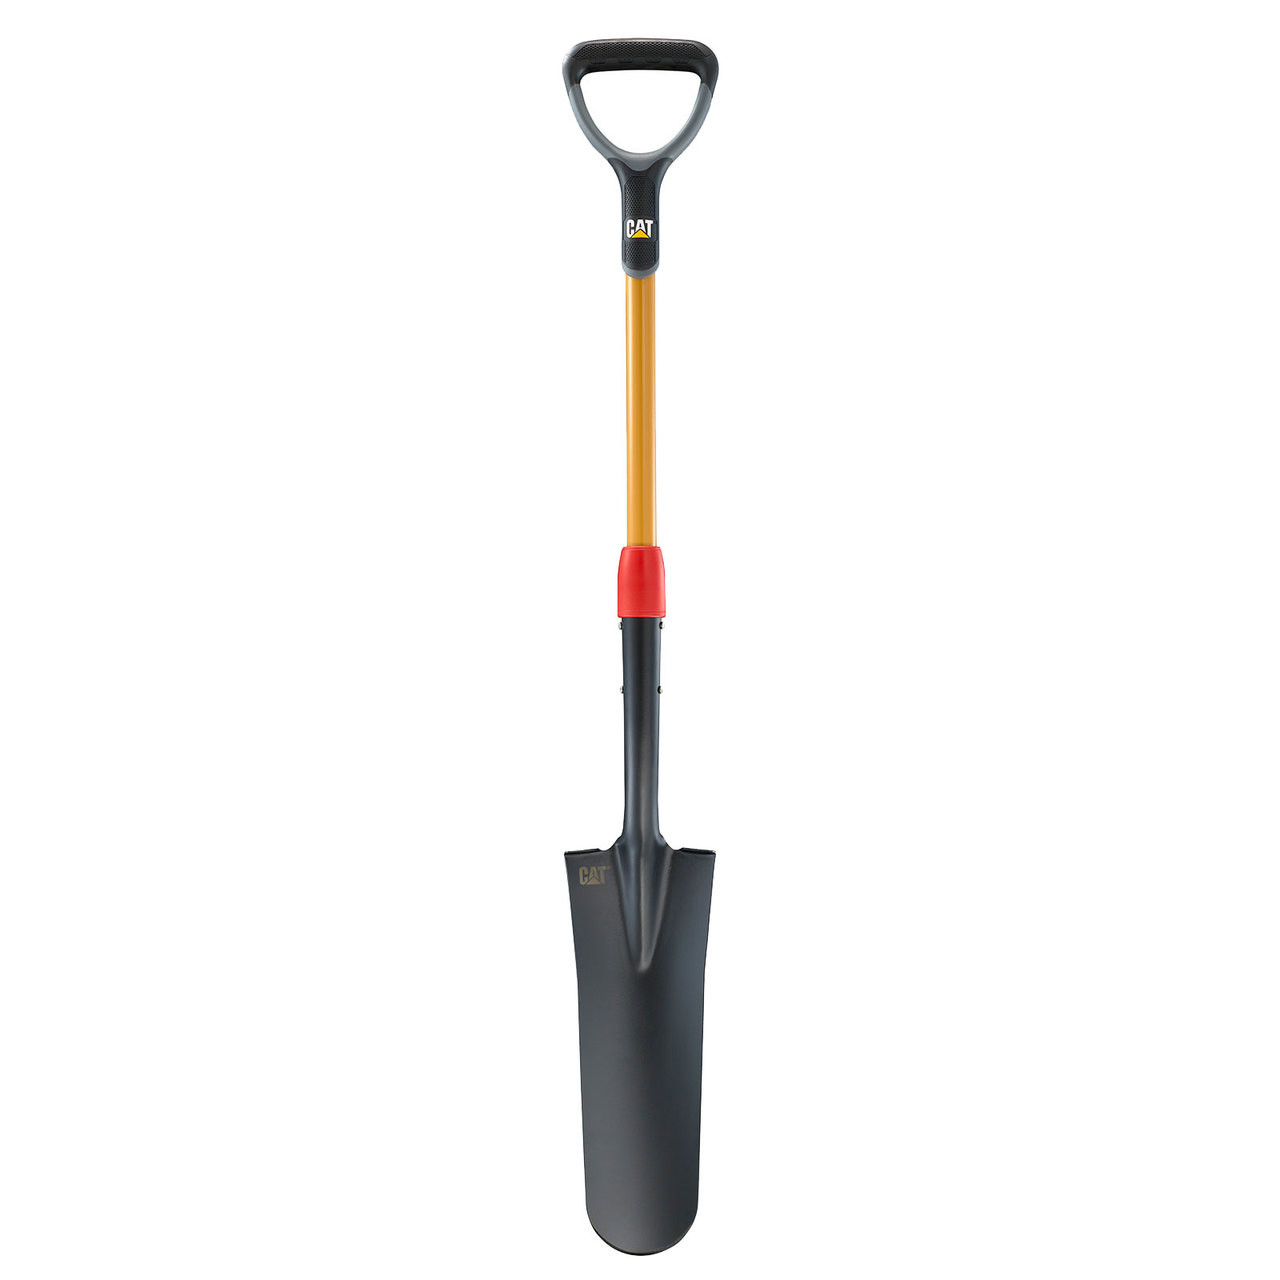 D-Handle Drainage Spade with 16" Blade